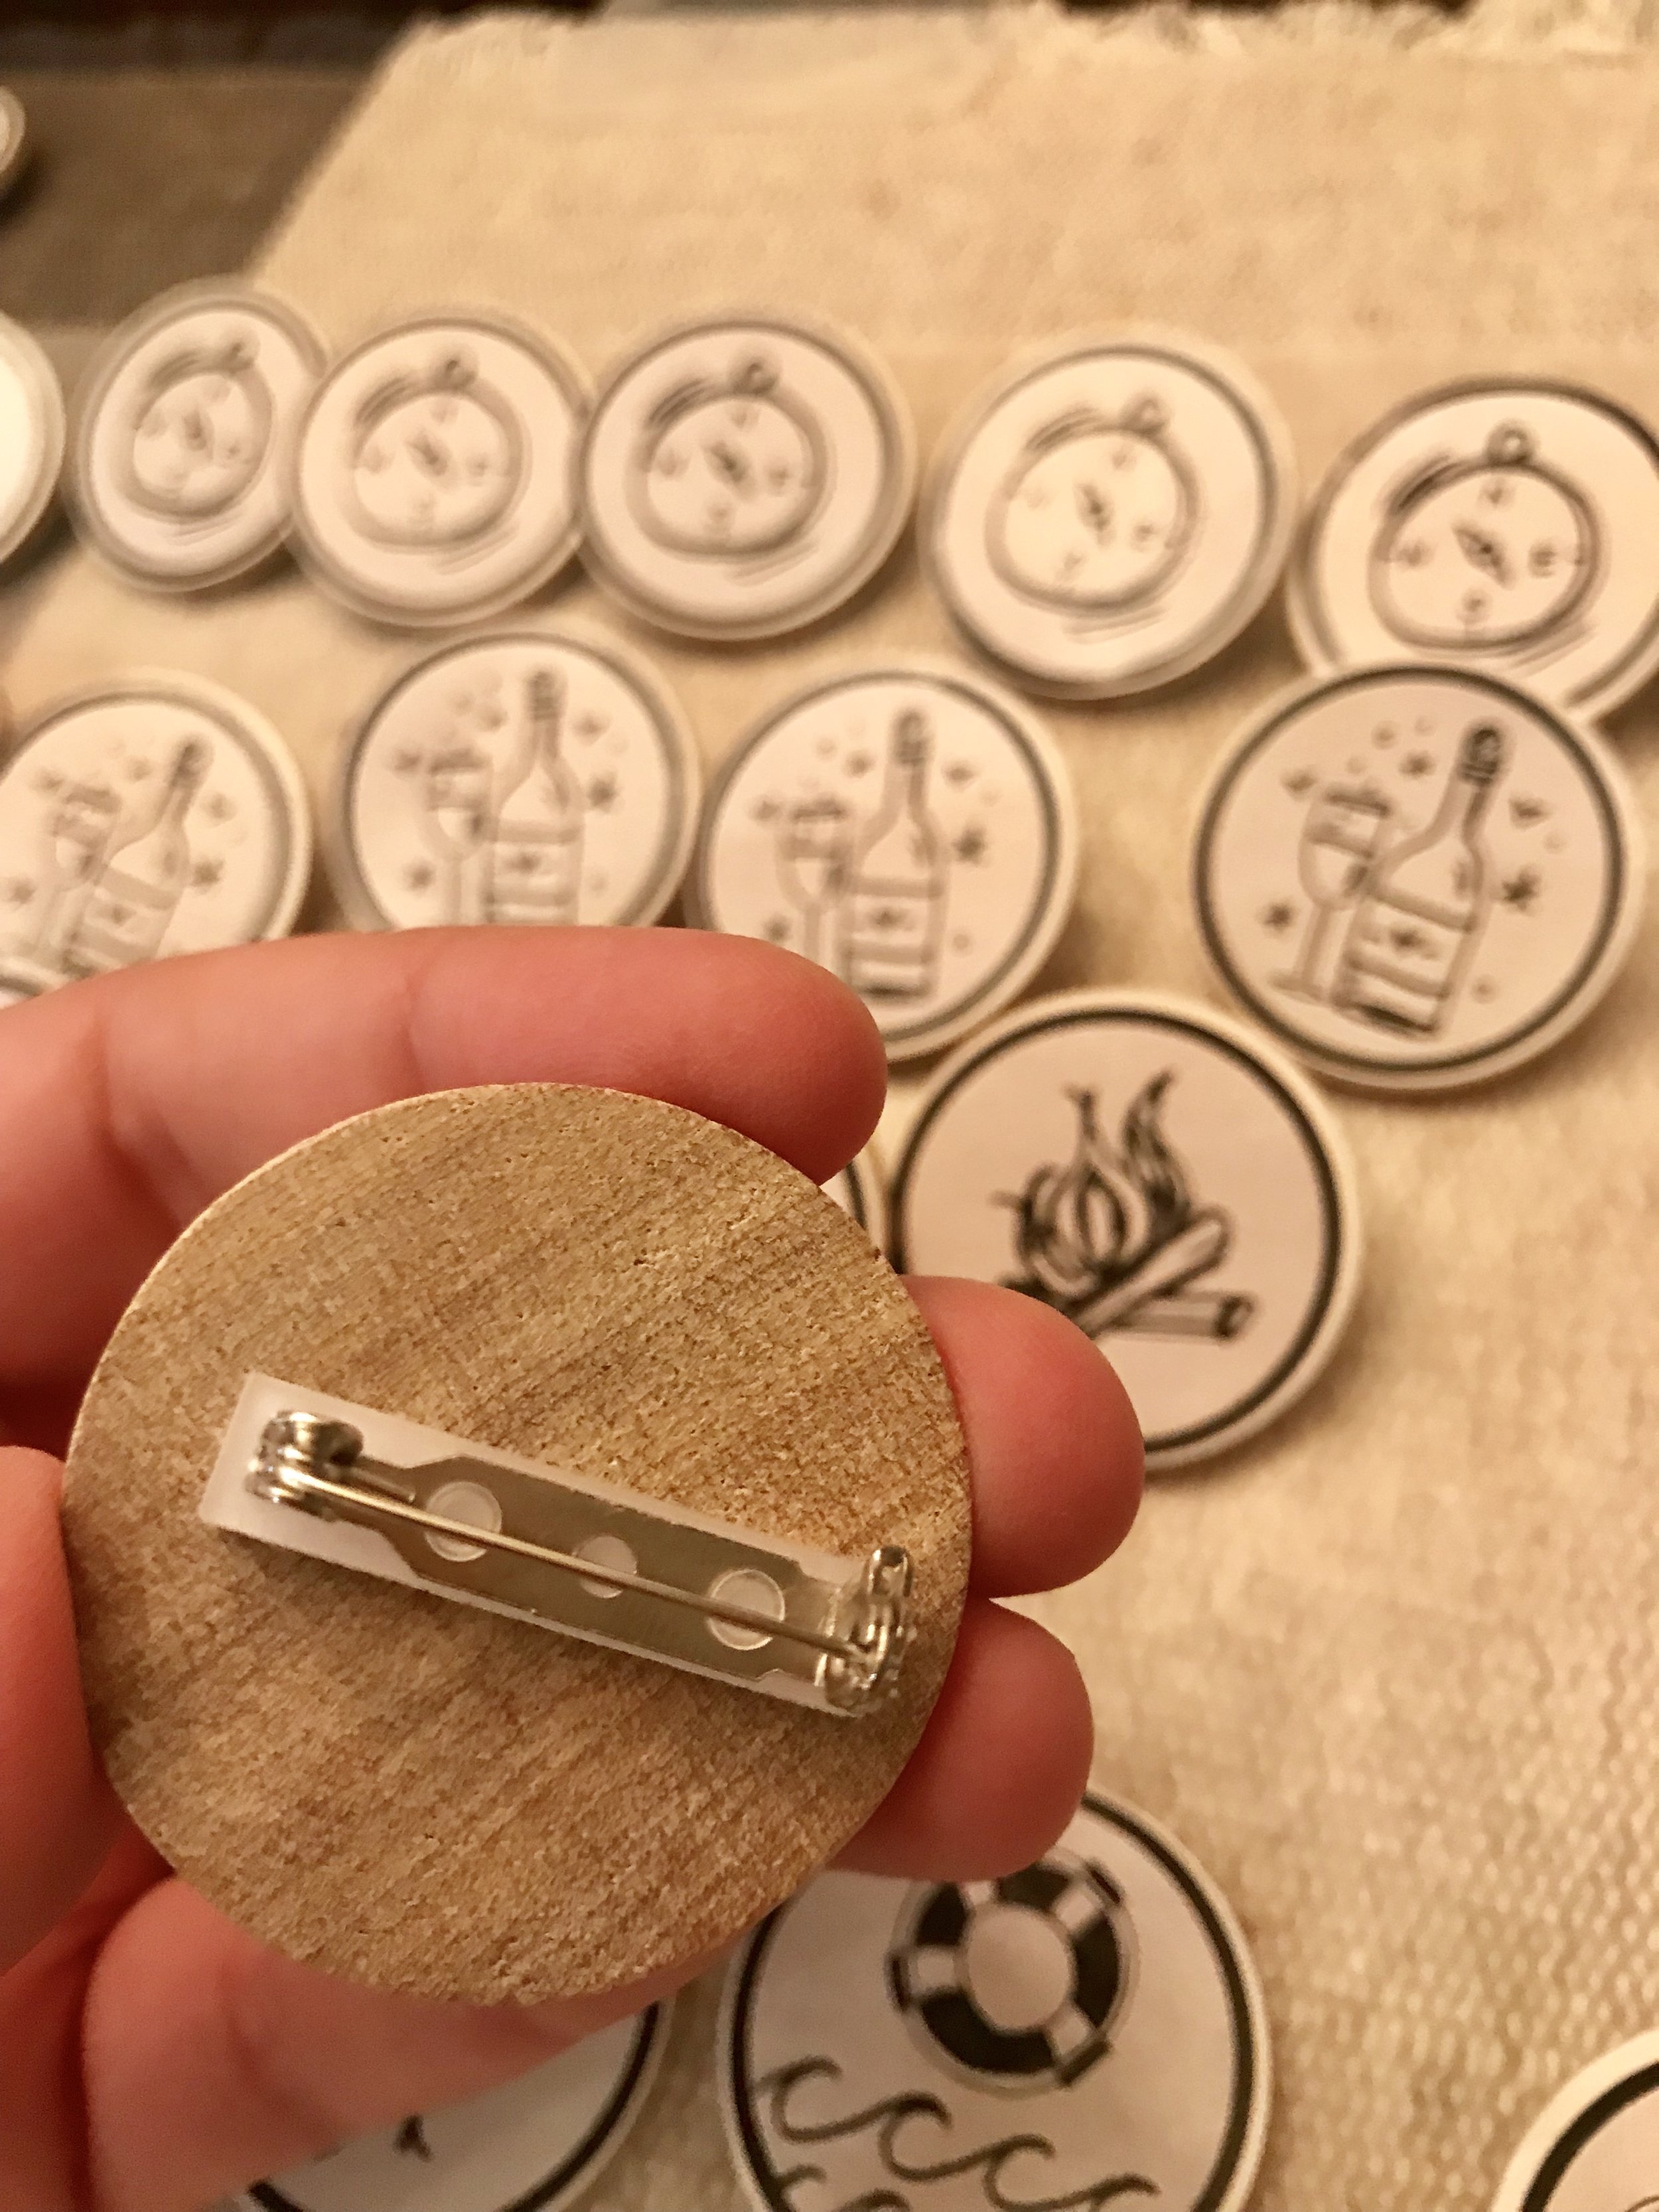  Attach a self-adhesive bar pin to make wood discs into merit badges. 